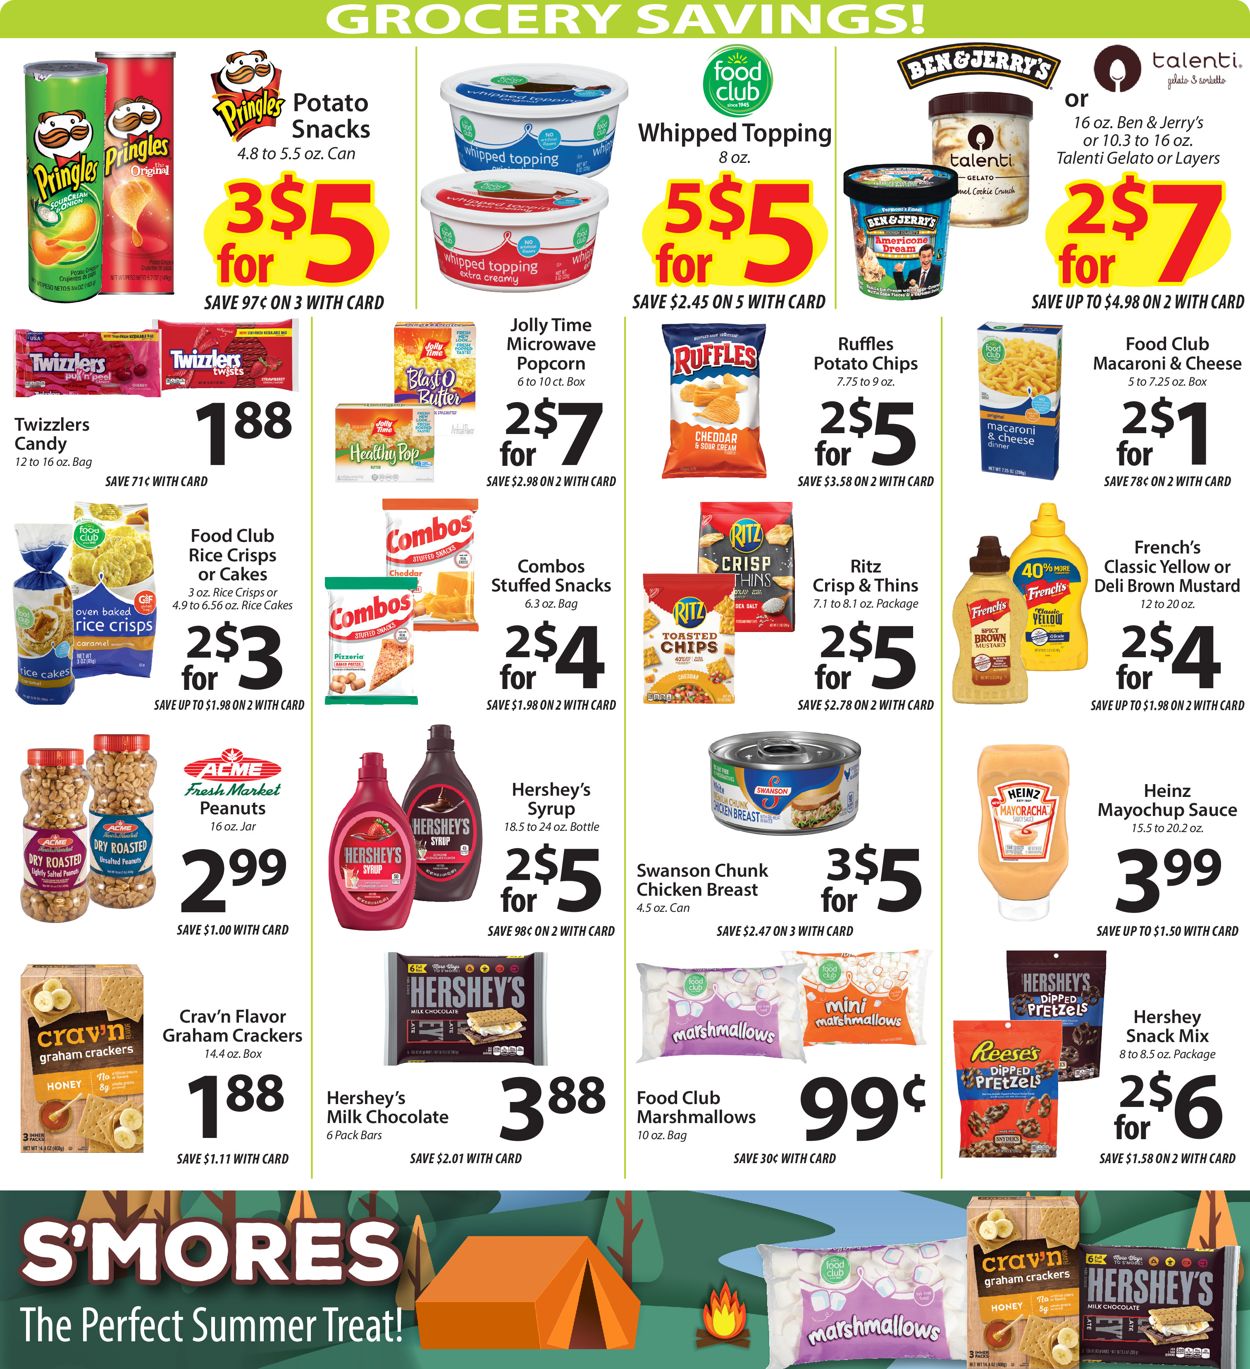 Acme Fresh Market Ad from 05/20/2021